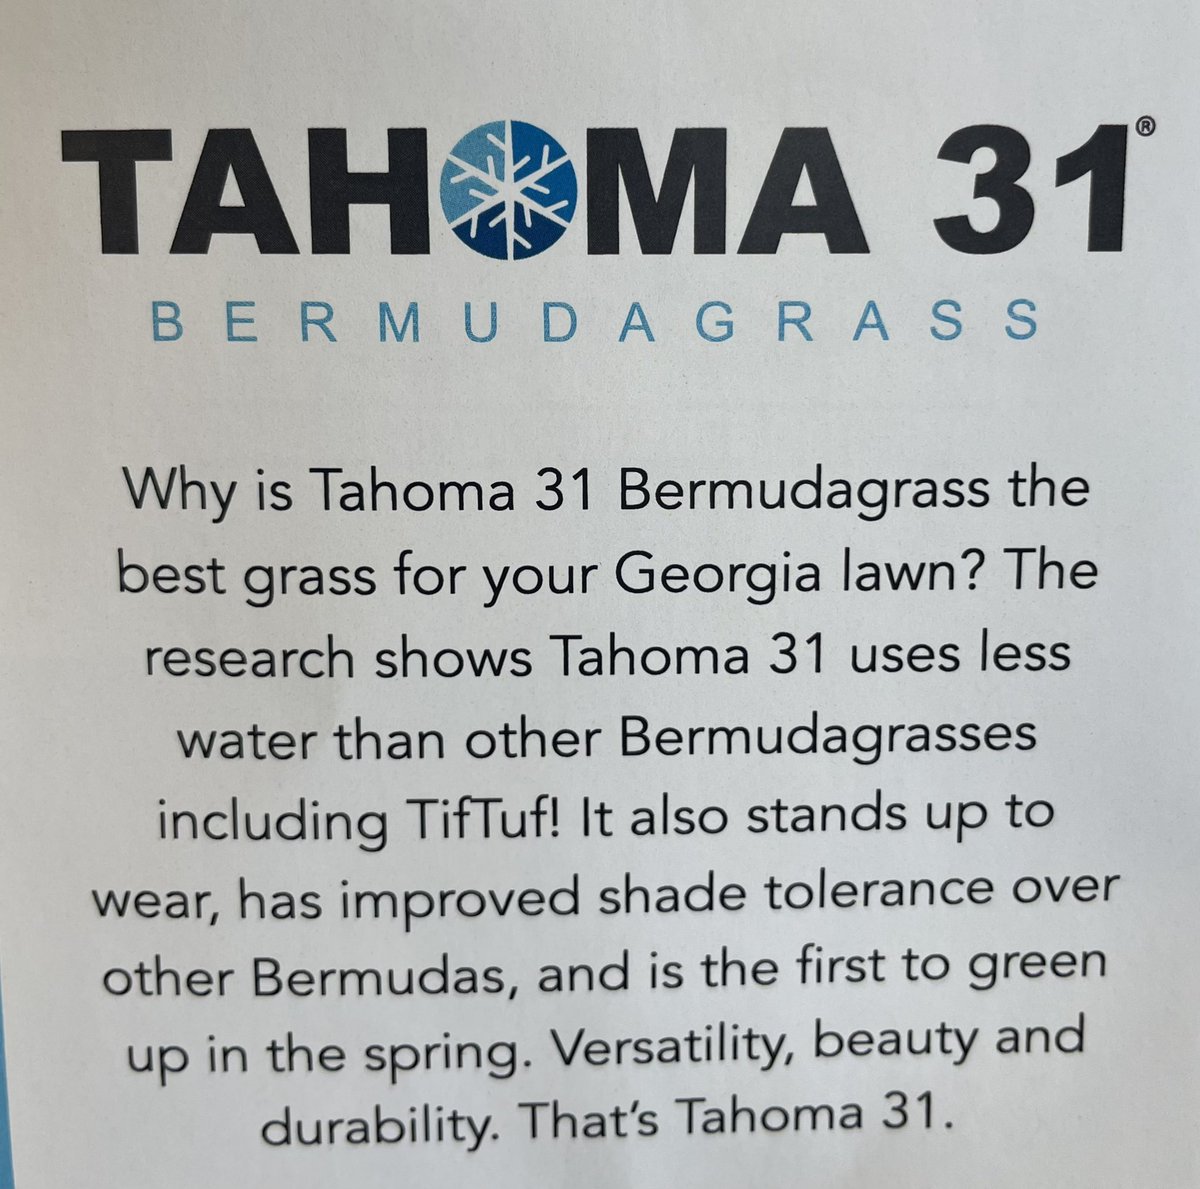 Guys and Gals, we at Legacy Turf Farms will be bringing you updated content, exciting news, and weekly info starting this coming Monday!!! Expect a consistent snippet of info on Tahoma 31 and a closer look into the operations here at the farm.